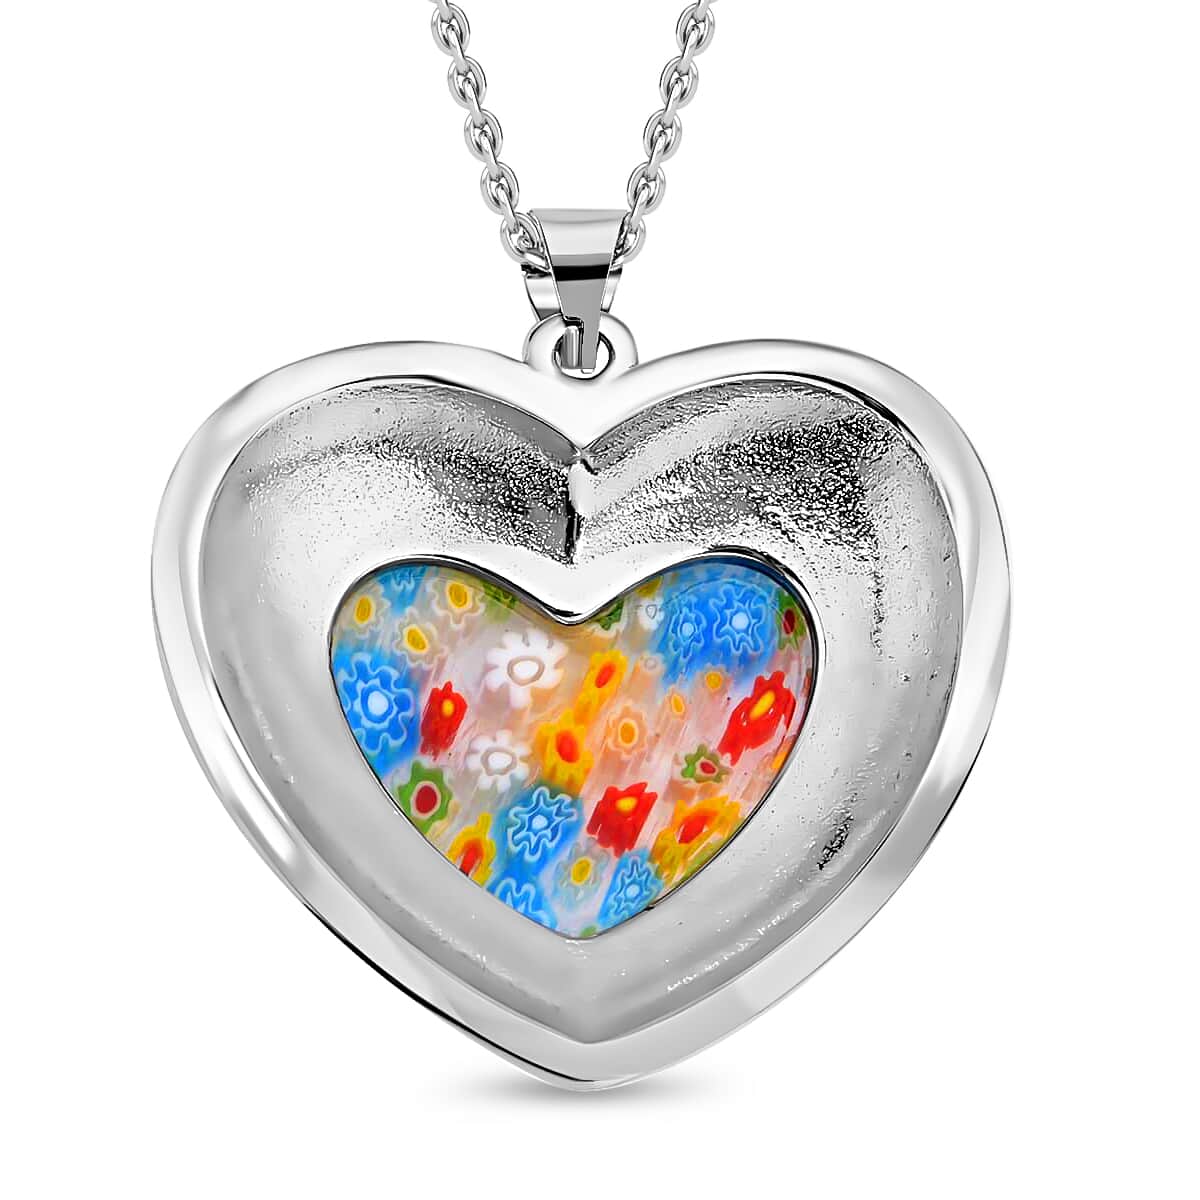 Murano Style and Enameled Heart Pendant Necklace 20 Inches in Stainless Steel, Floral Millefiori Pendant Necklace, Sweatproof Hypoallergenic Necklace, Gift For Her image number 4